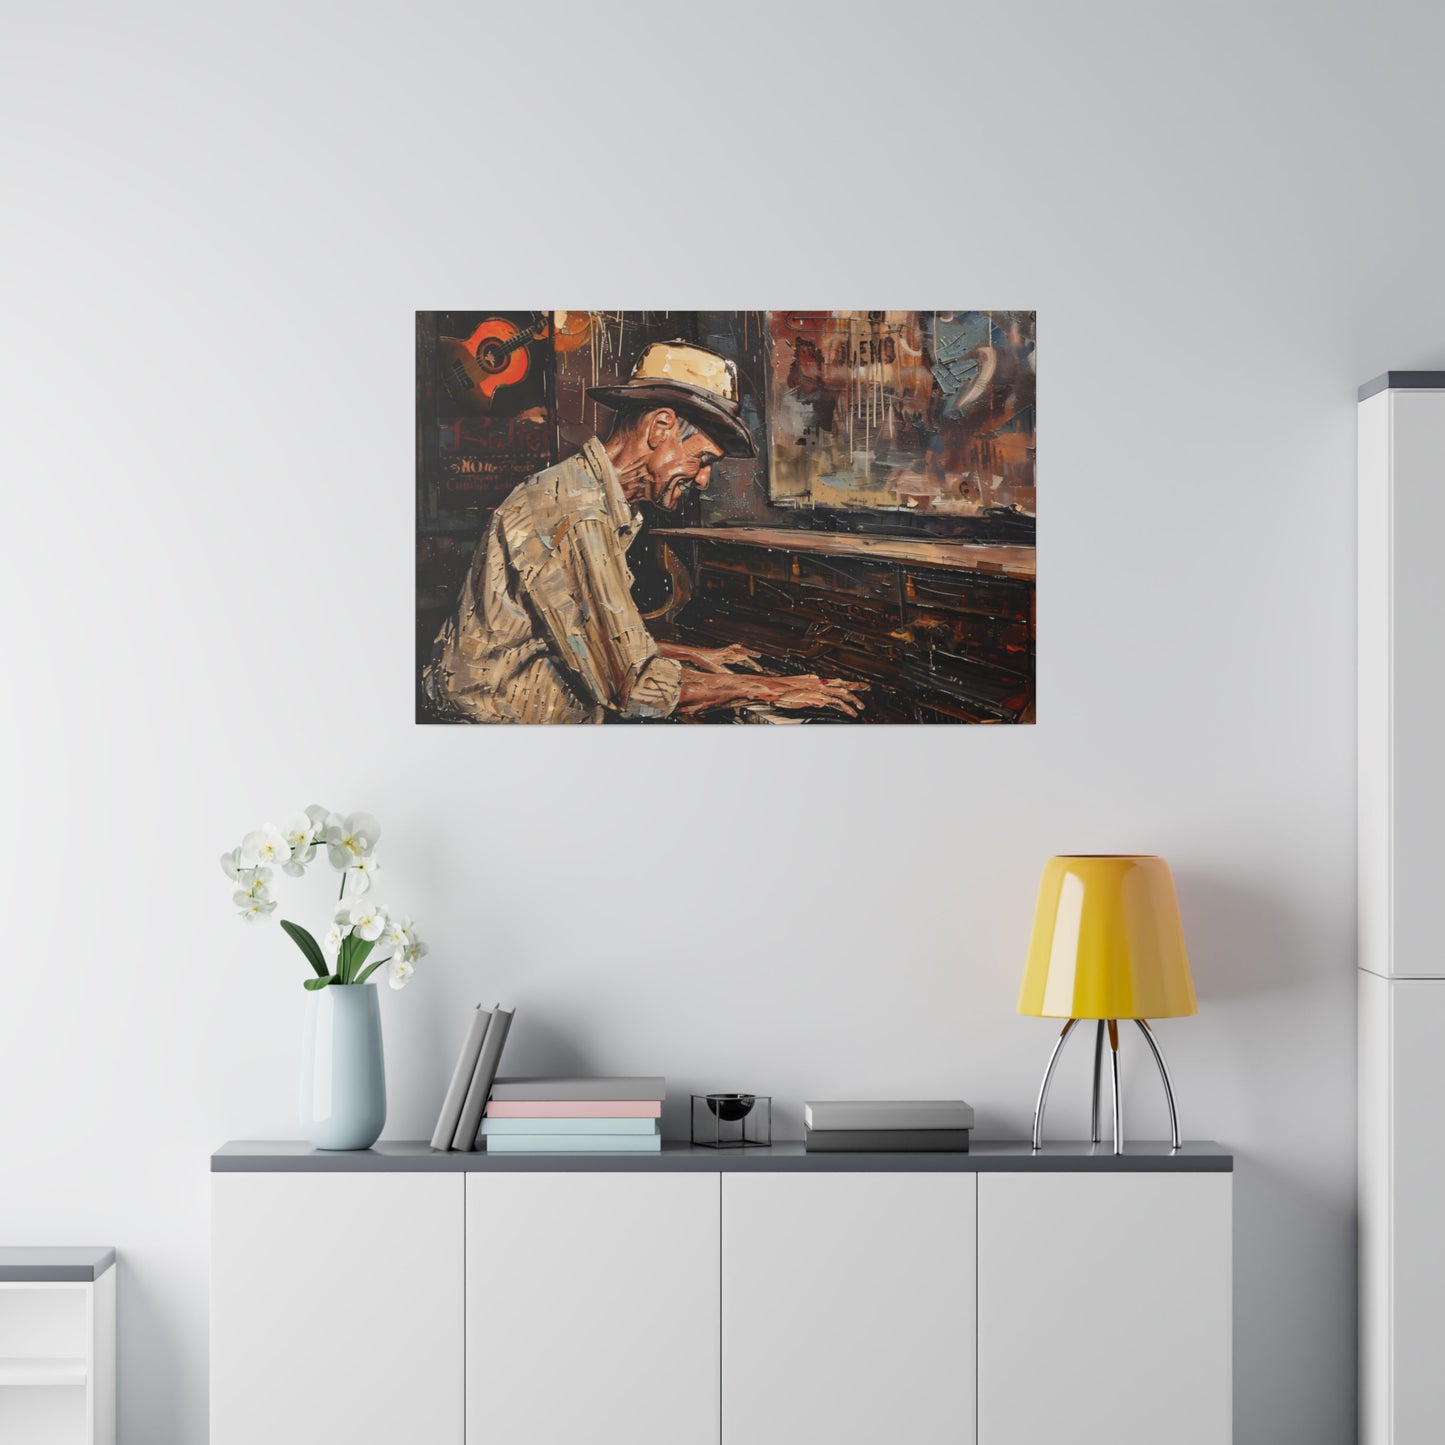 Matte Canvas, Stretched, 0.75" - Honky Tonk Piano Player